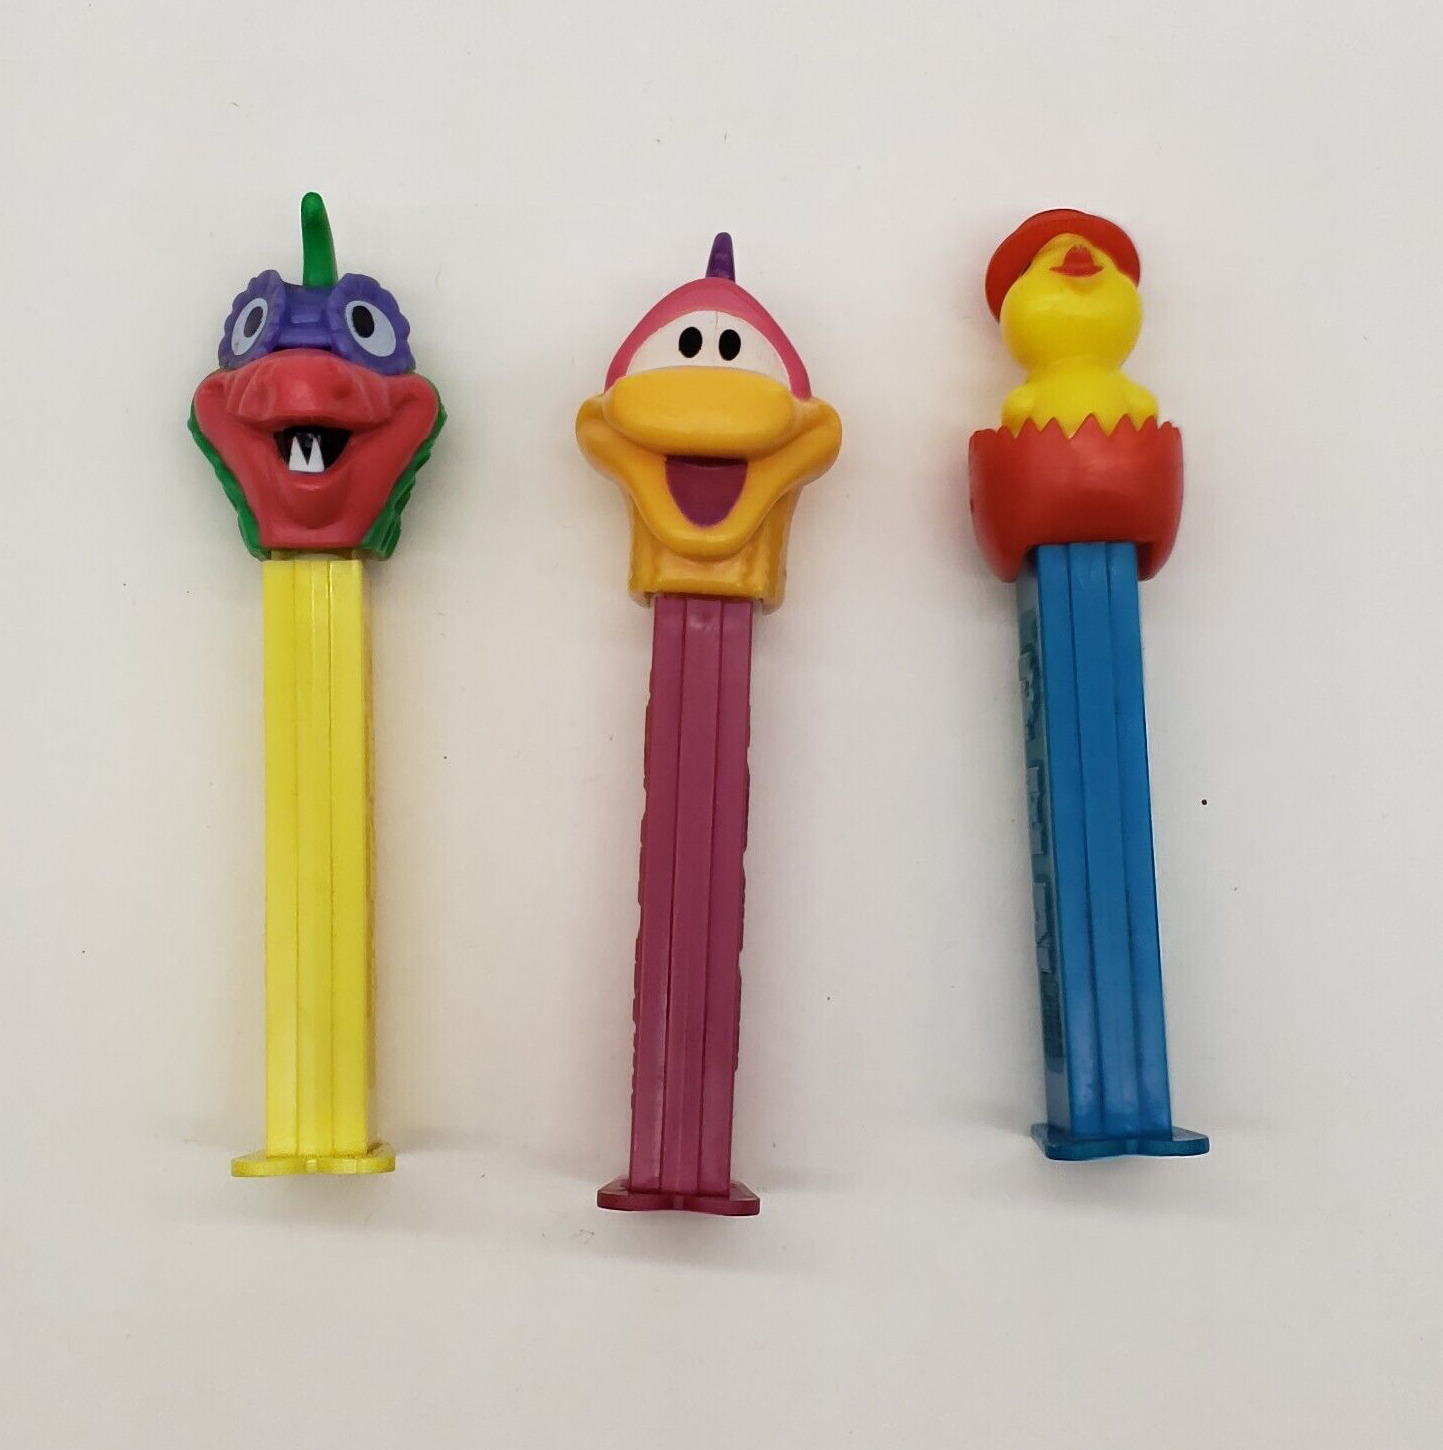 PEZ Candy Dispensers  Fly-Saur Yellow Stem, He-Saur,  Chic in Shell Vtg Hungary